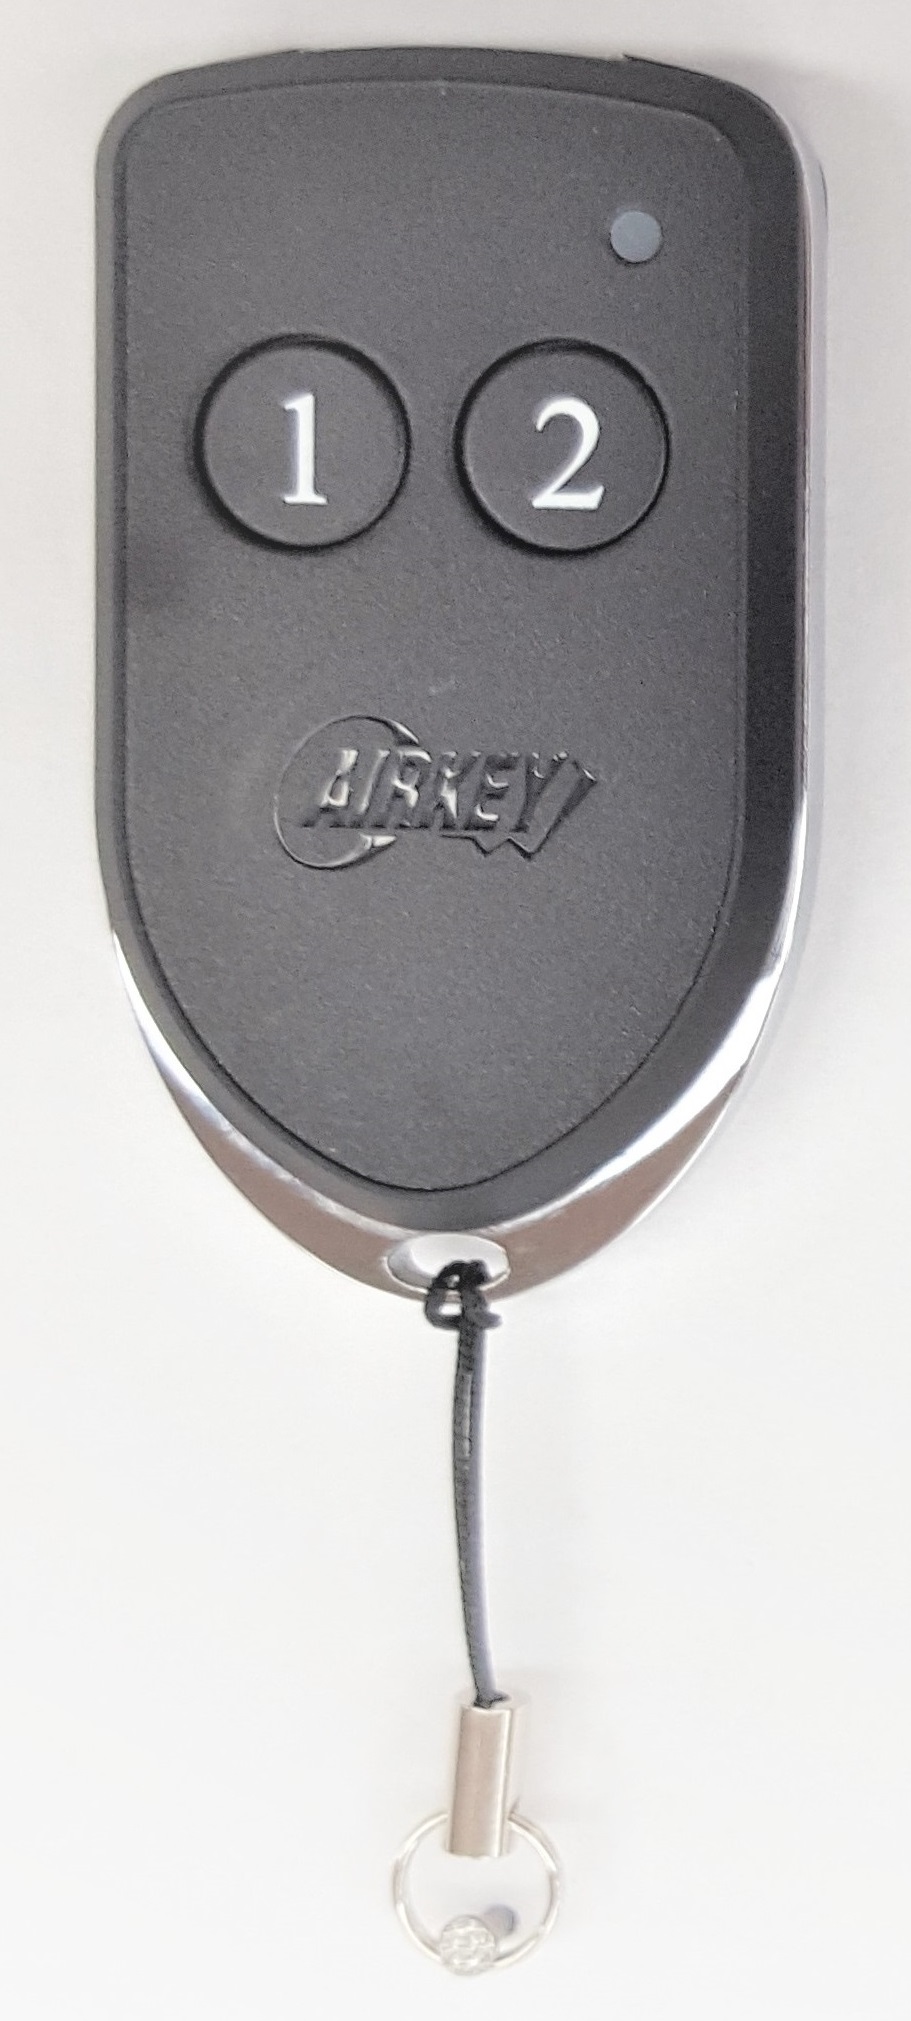 AIRKEY SERIES-4, 2 BUTTON REMOTE 26-BIT WIEGAND TRANSMITTER WITH HID PROX COIL 433.92MHz IP65 BLACK WITH SILVER TRIM WITH BLACK KEYS 1/2 ROLLING CODE ENCRYPTION